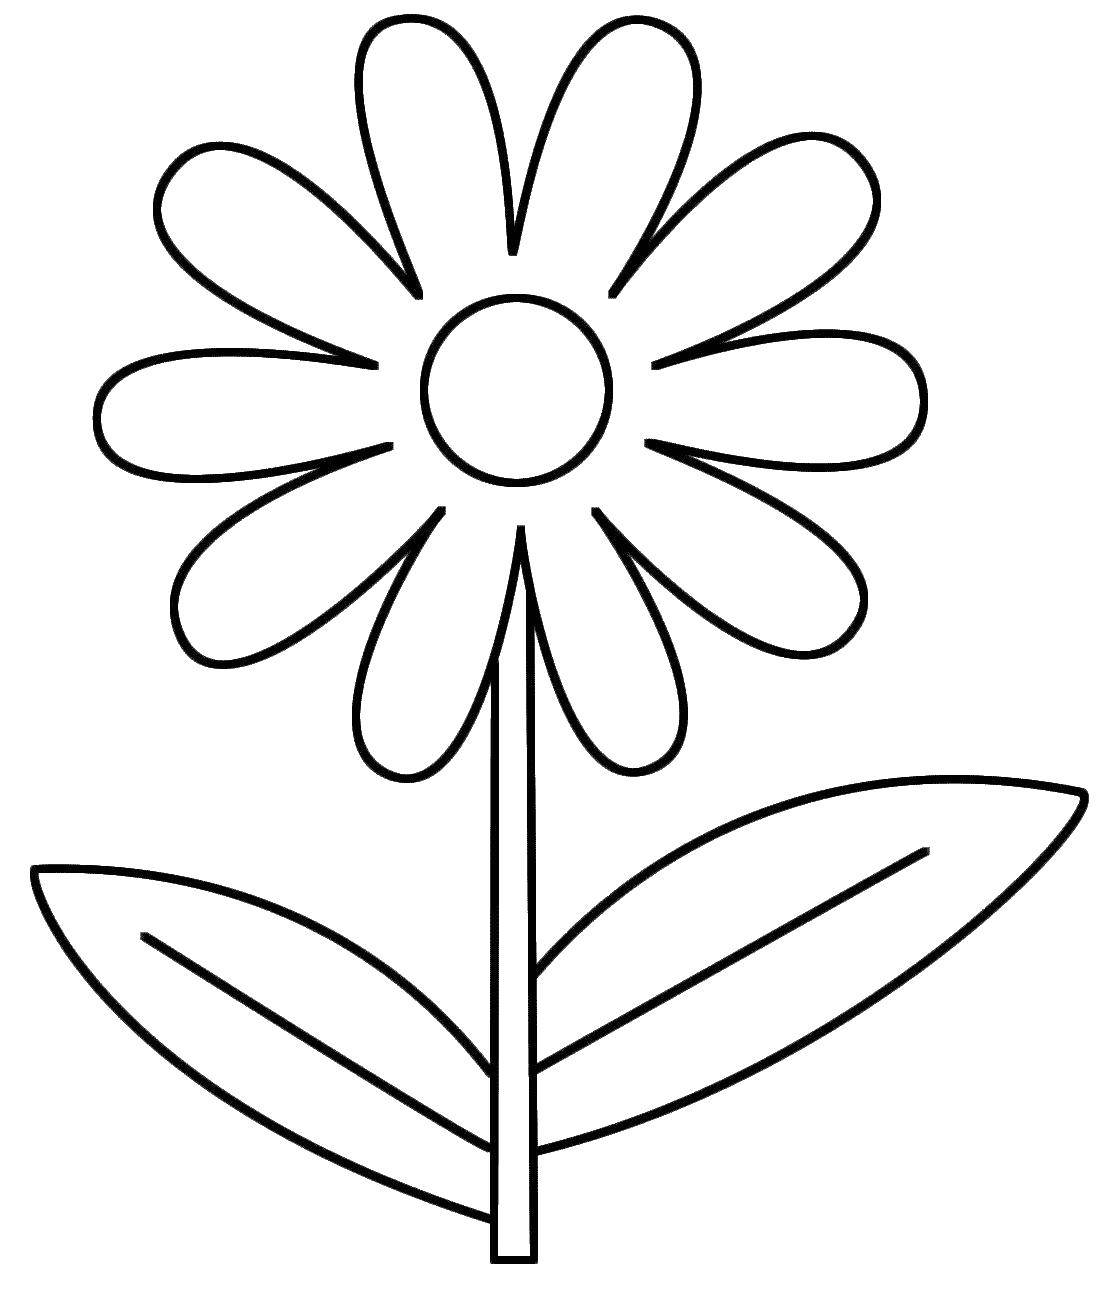 Coloring Daisy. Category plants. Tags:  chamomile.